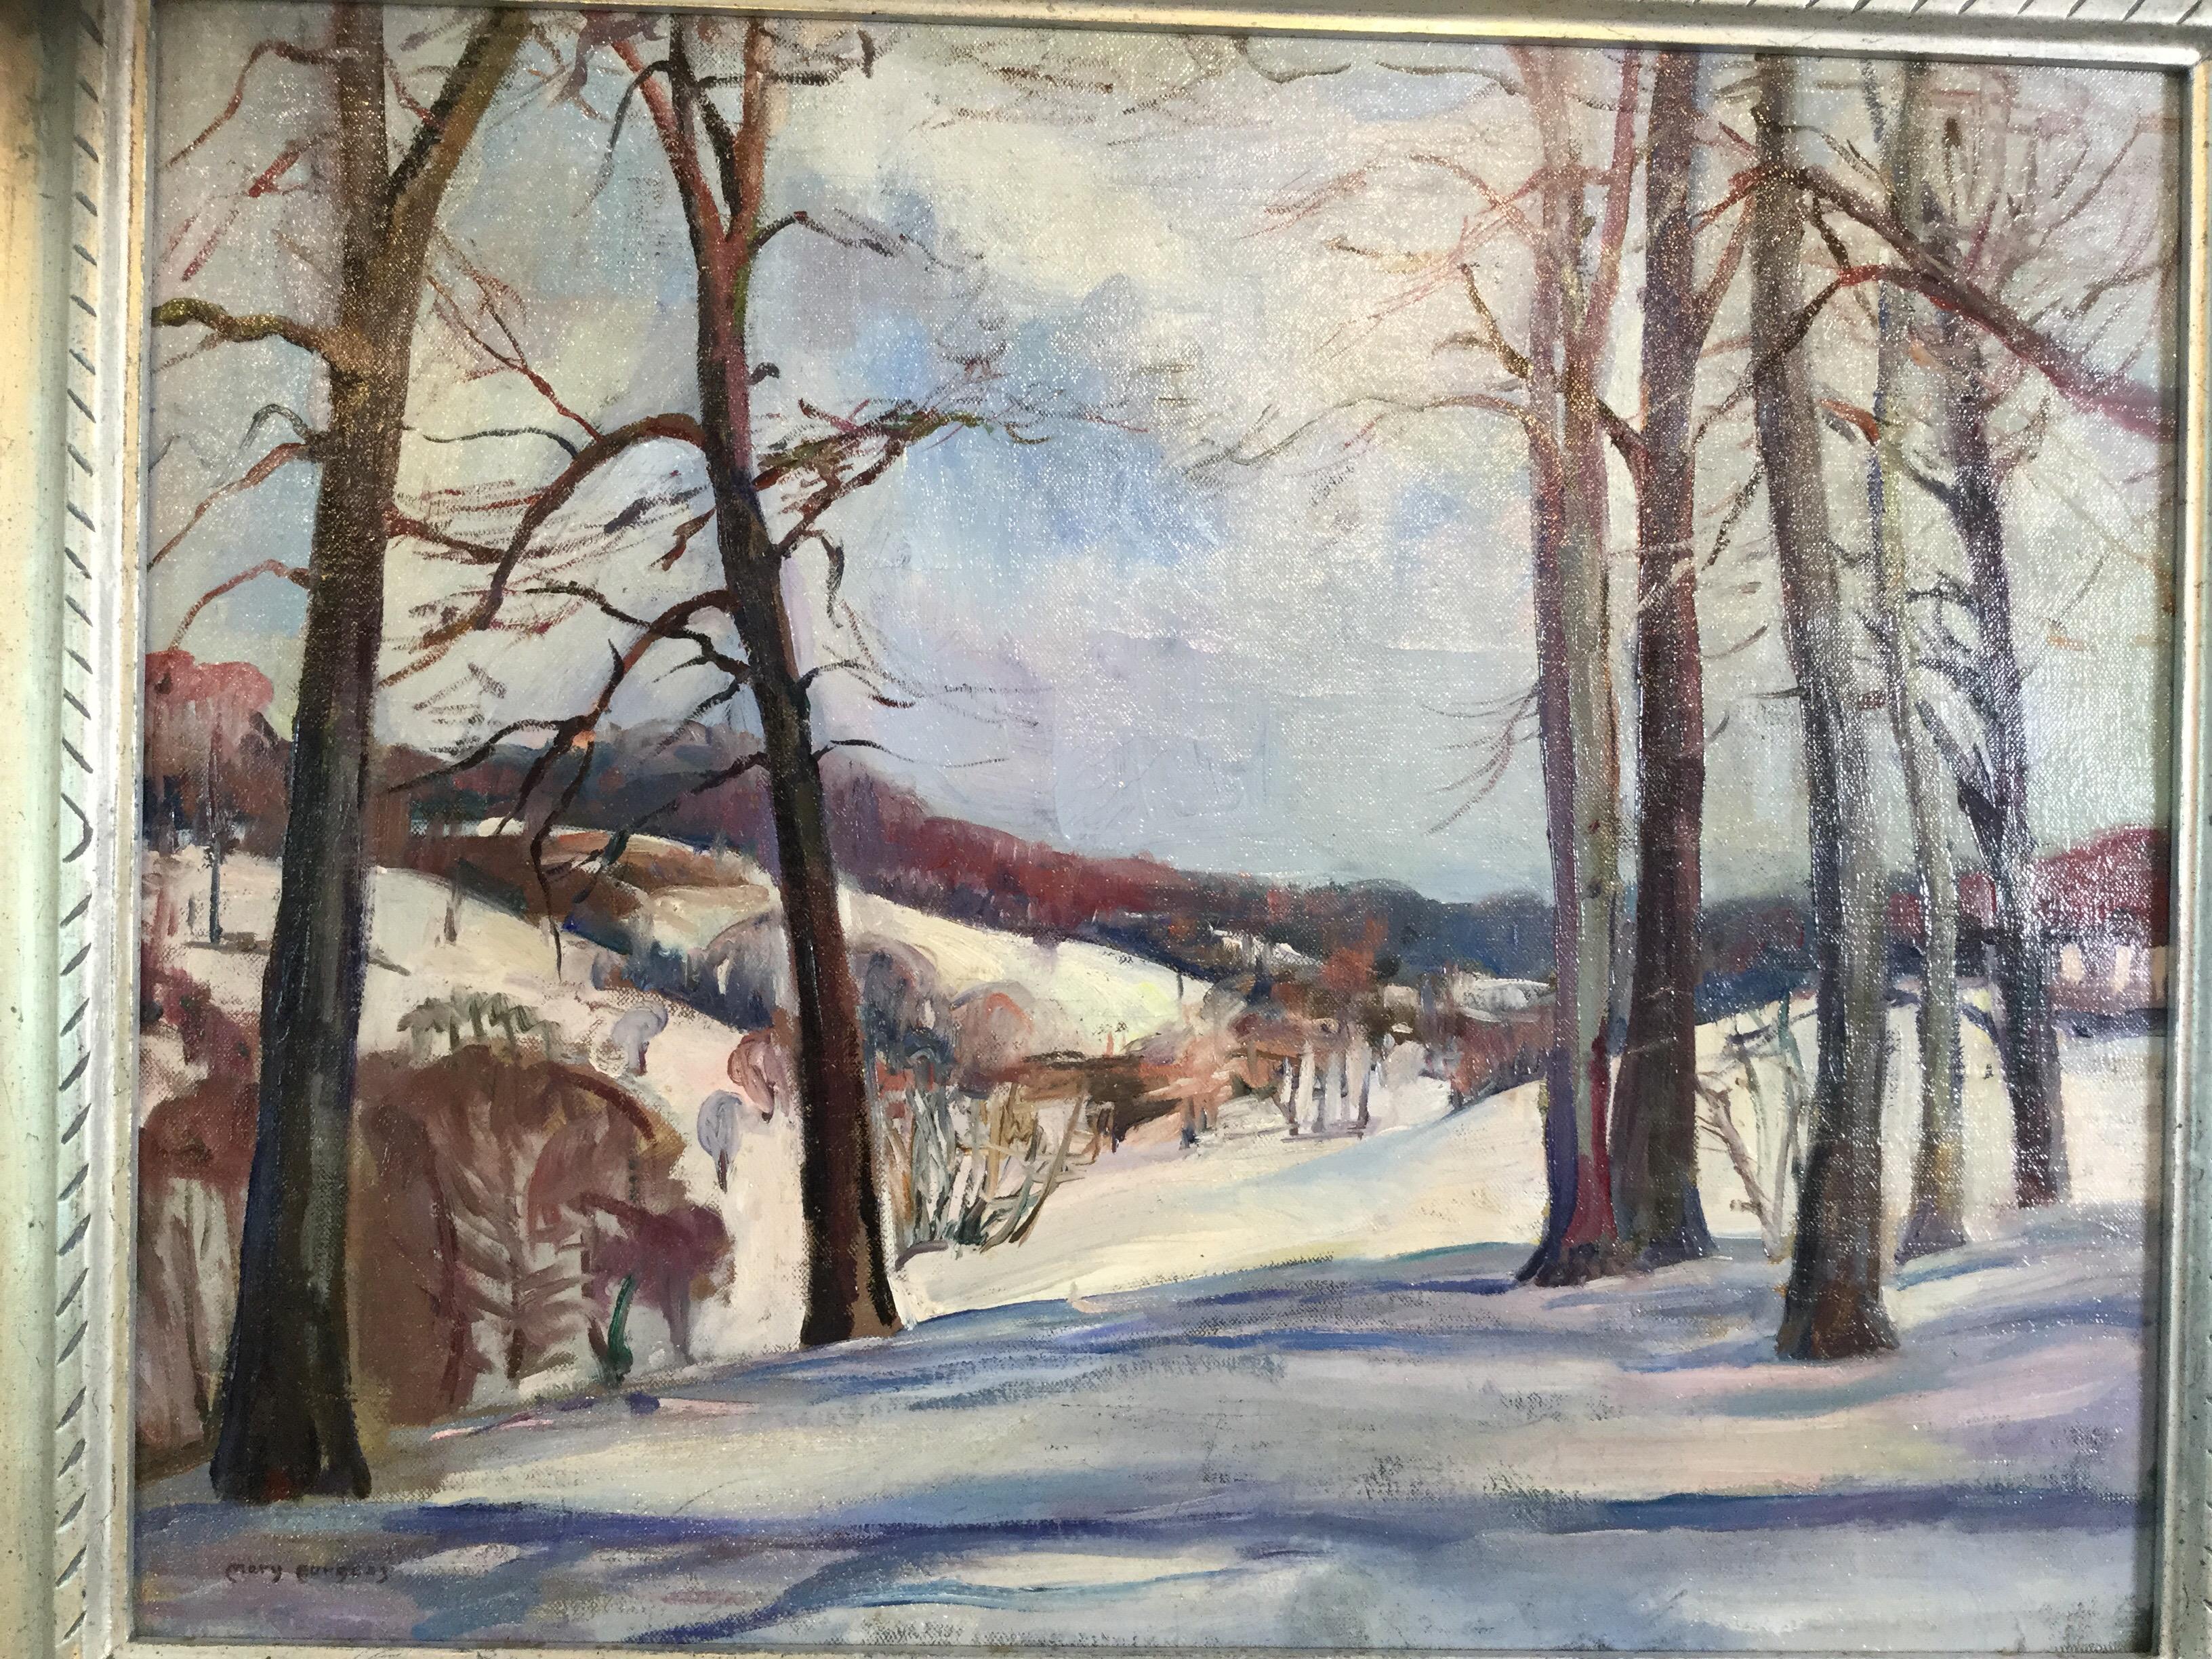 Mary Burgess is of the New Hope School and this is a wonderful Pennsylvania Impressionist winter landscape in its original frame. Signed in lower left corner. Overall size 25